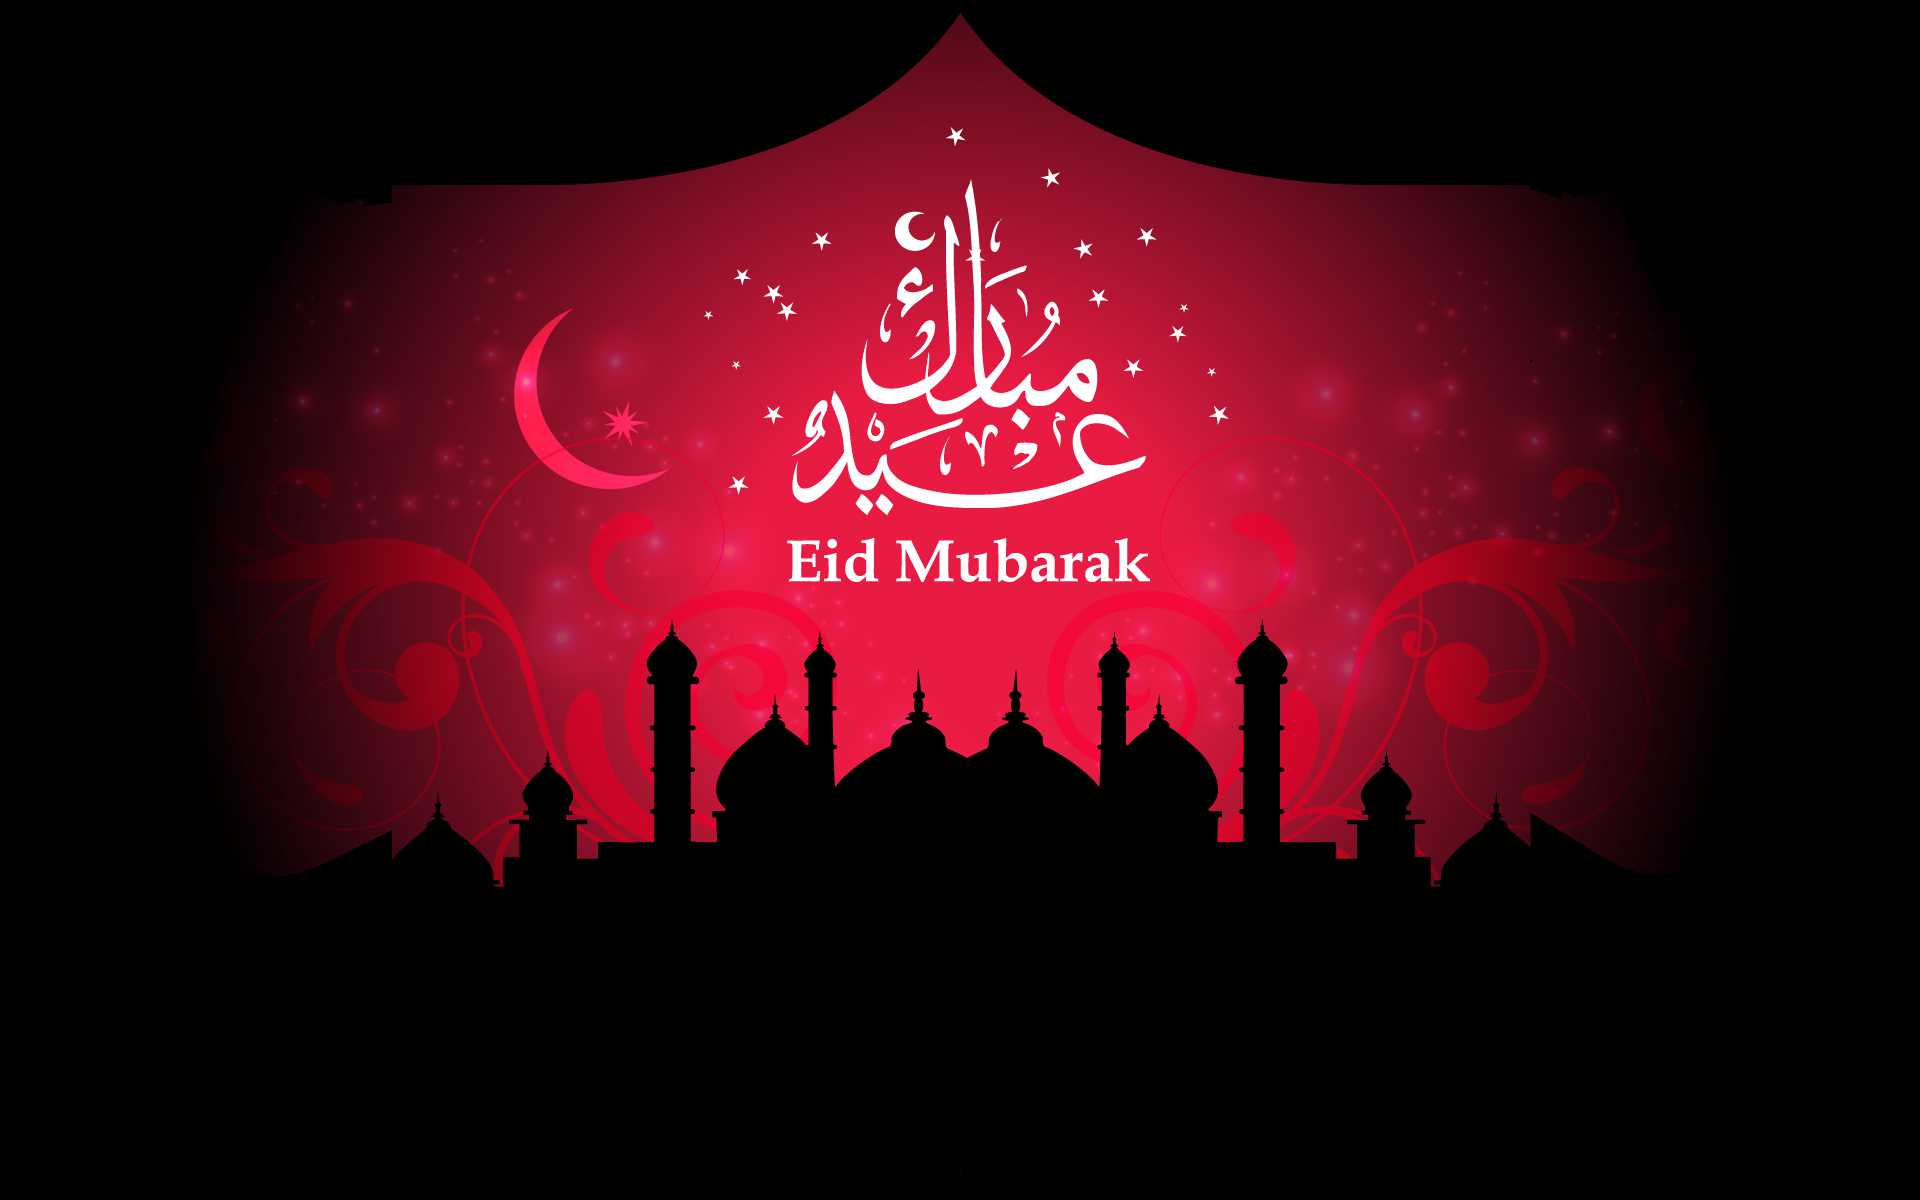 Eid Mubarak Greetings Wishes Cards Image With Glitters